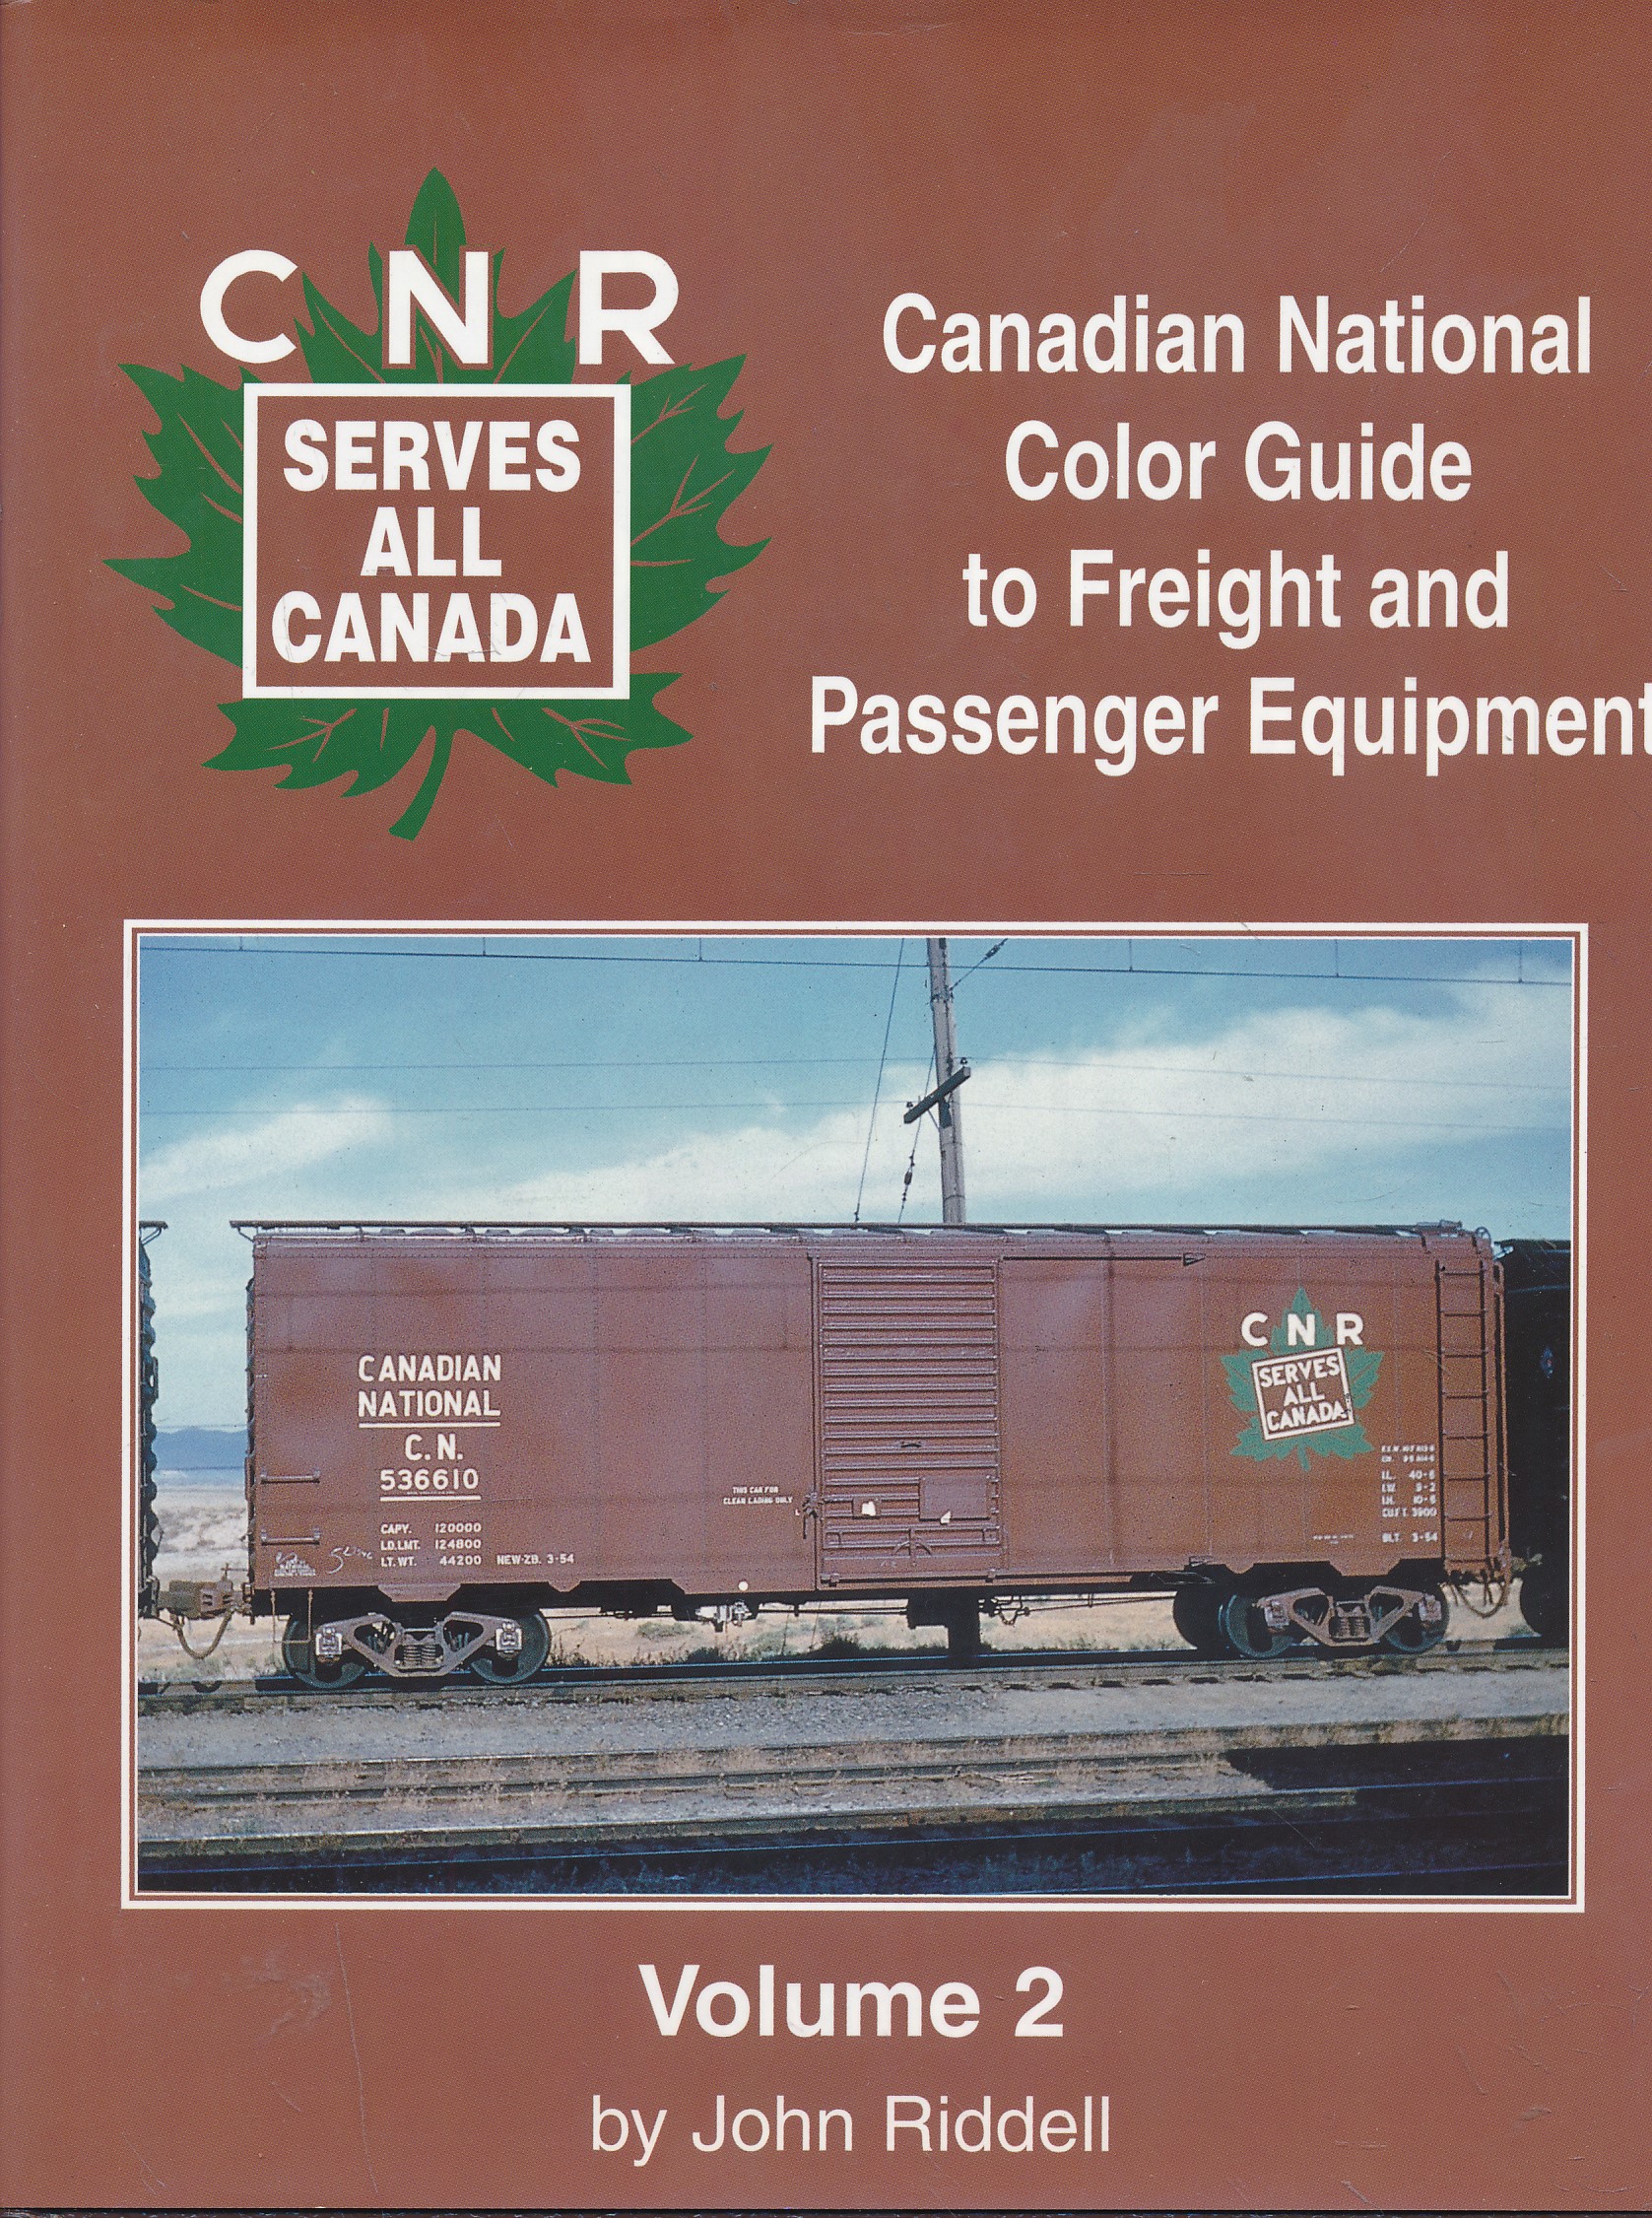 Canadian National Color Guide to Freight and Passenger Equipment. Volume 2.